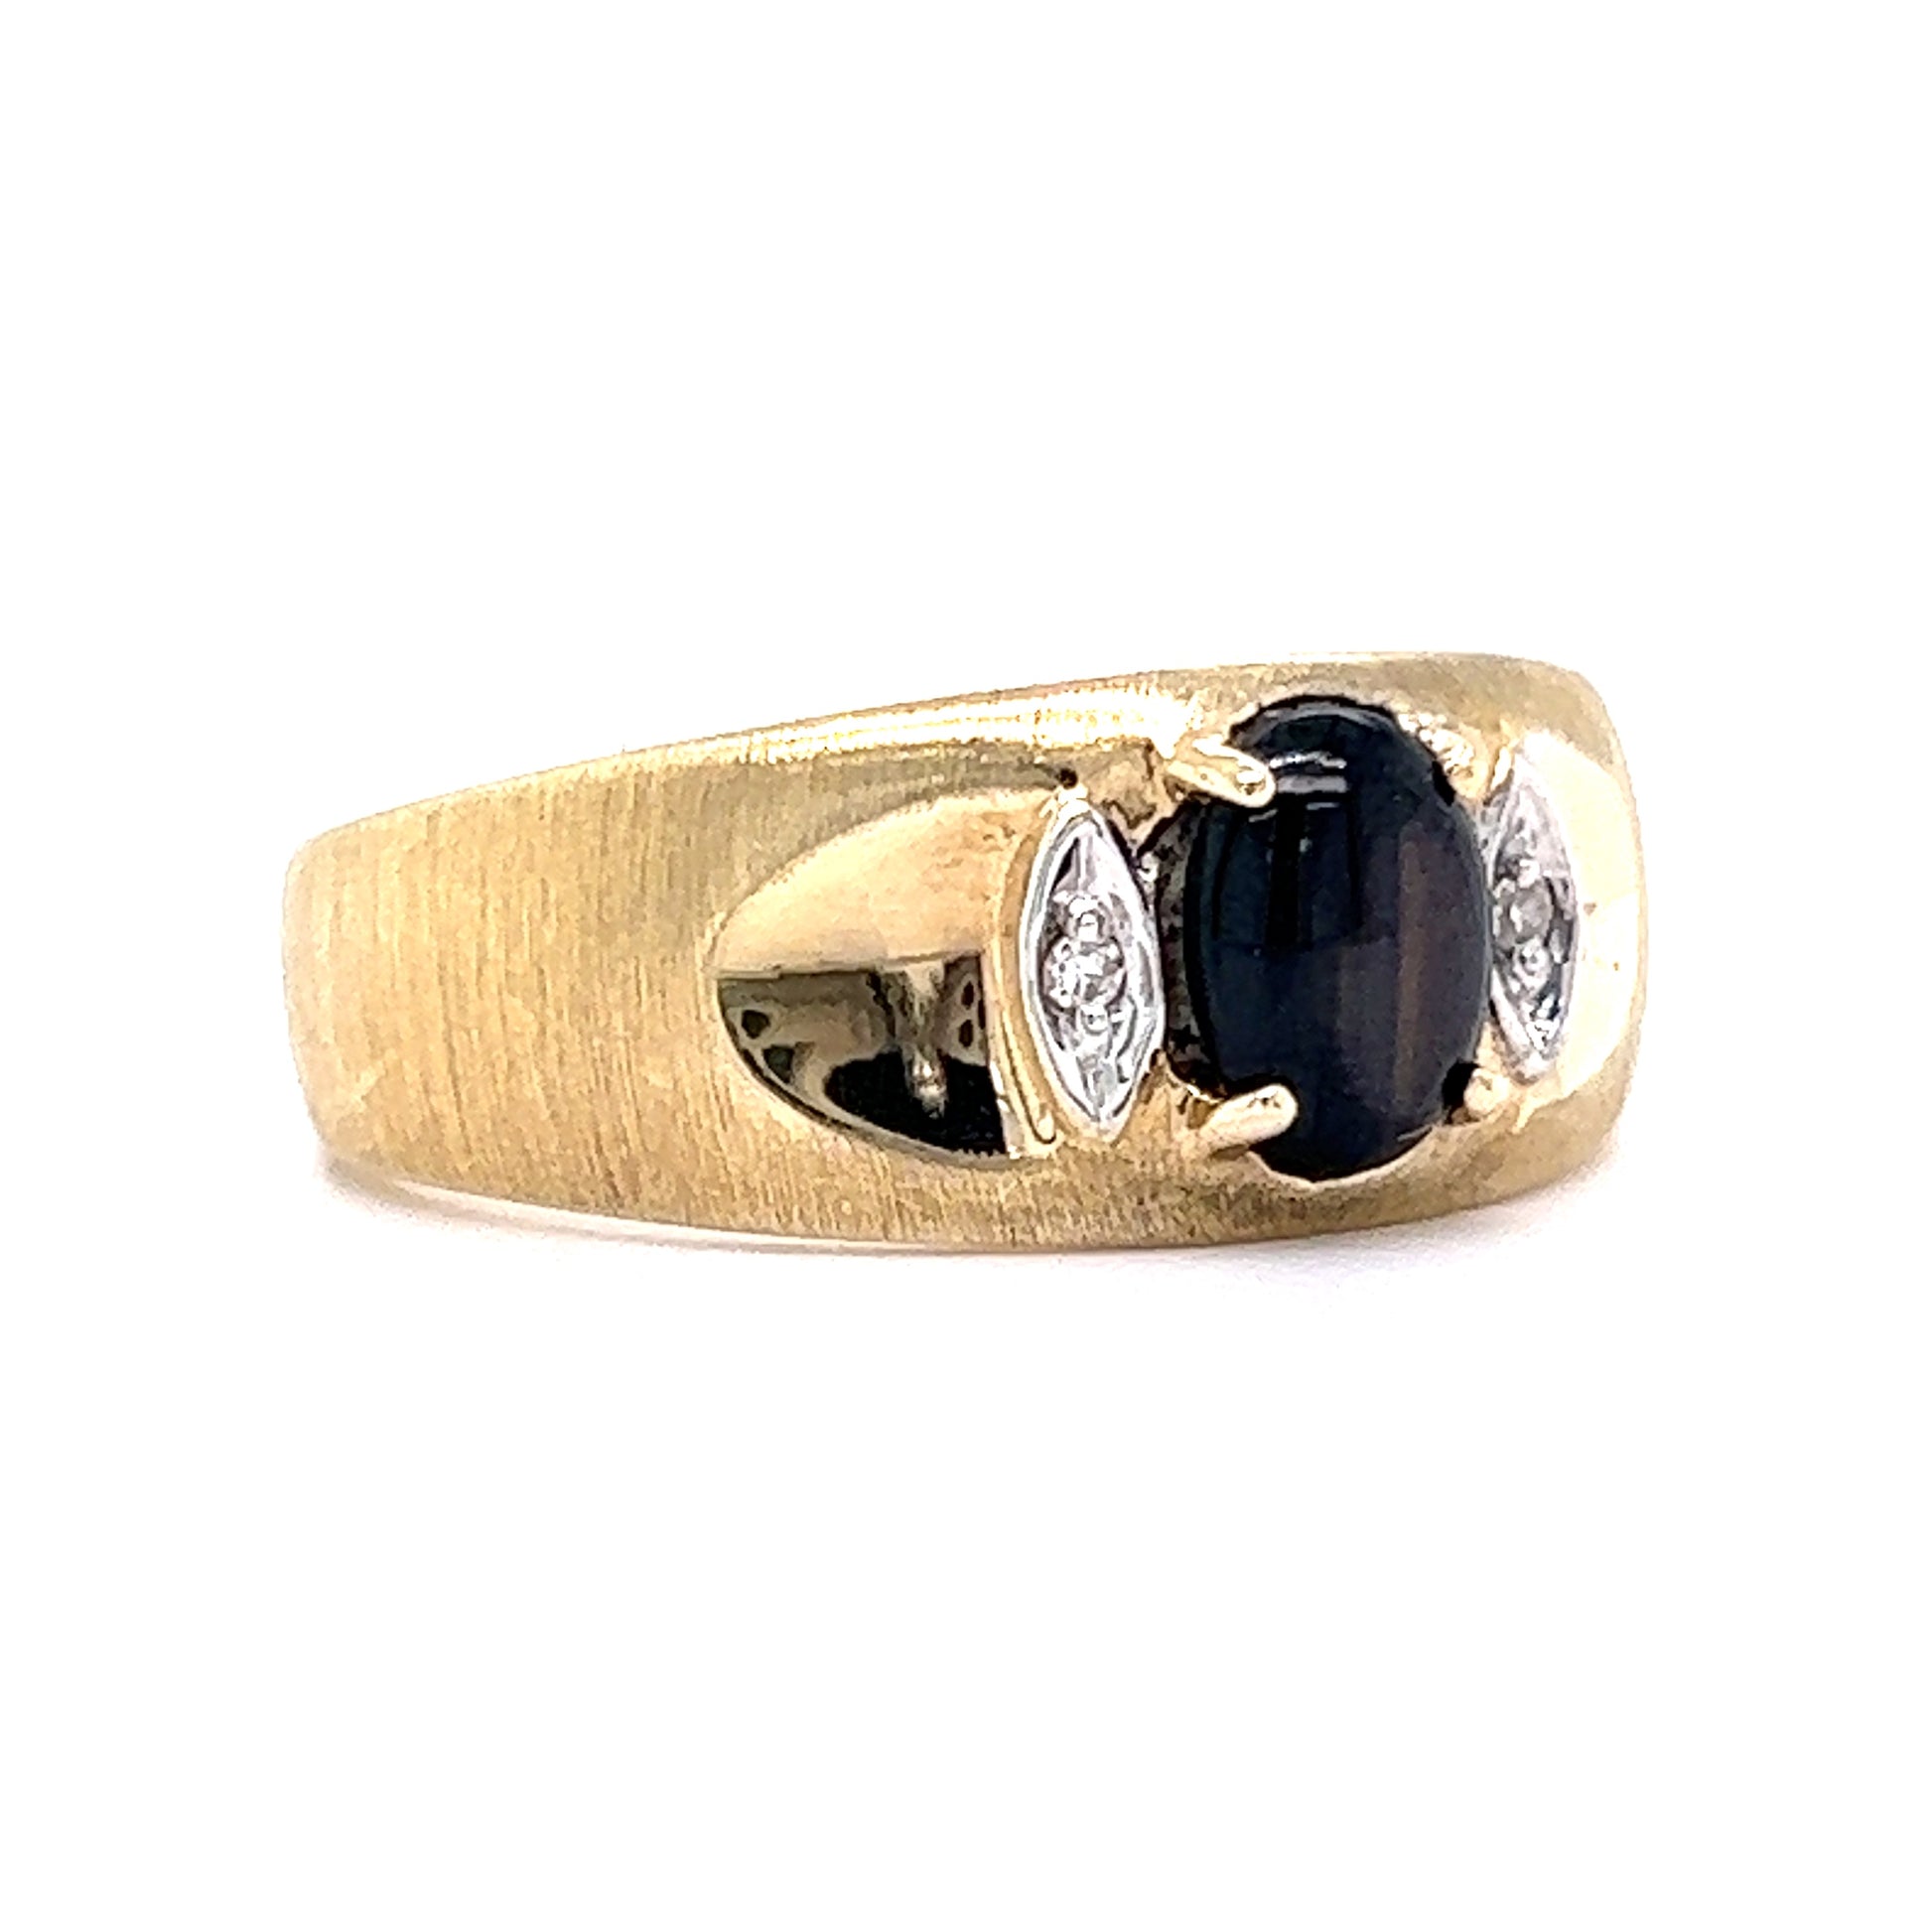 1.02 Cabochon Cut Cat's Eye Cocktail Ring in 14k Yellow GoldComposition: 14 Karat Yellow Gold Ring Size: 10.0 Total Diamond Weight: .028ct Total Gram Weight: 5.8 g Inscription: 14k
      